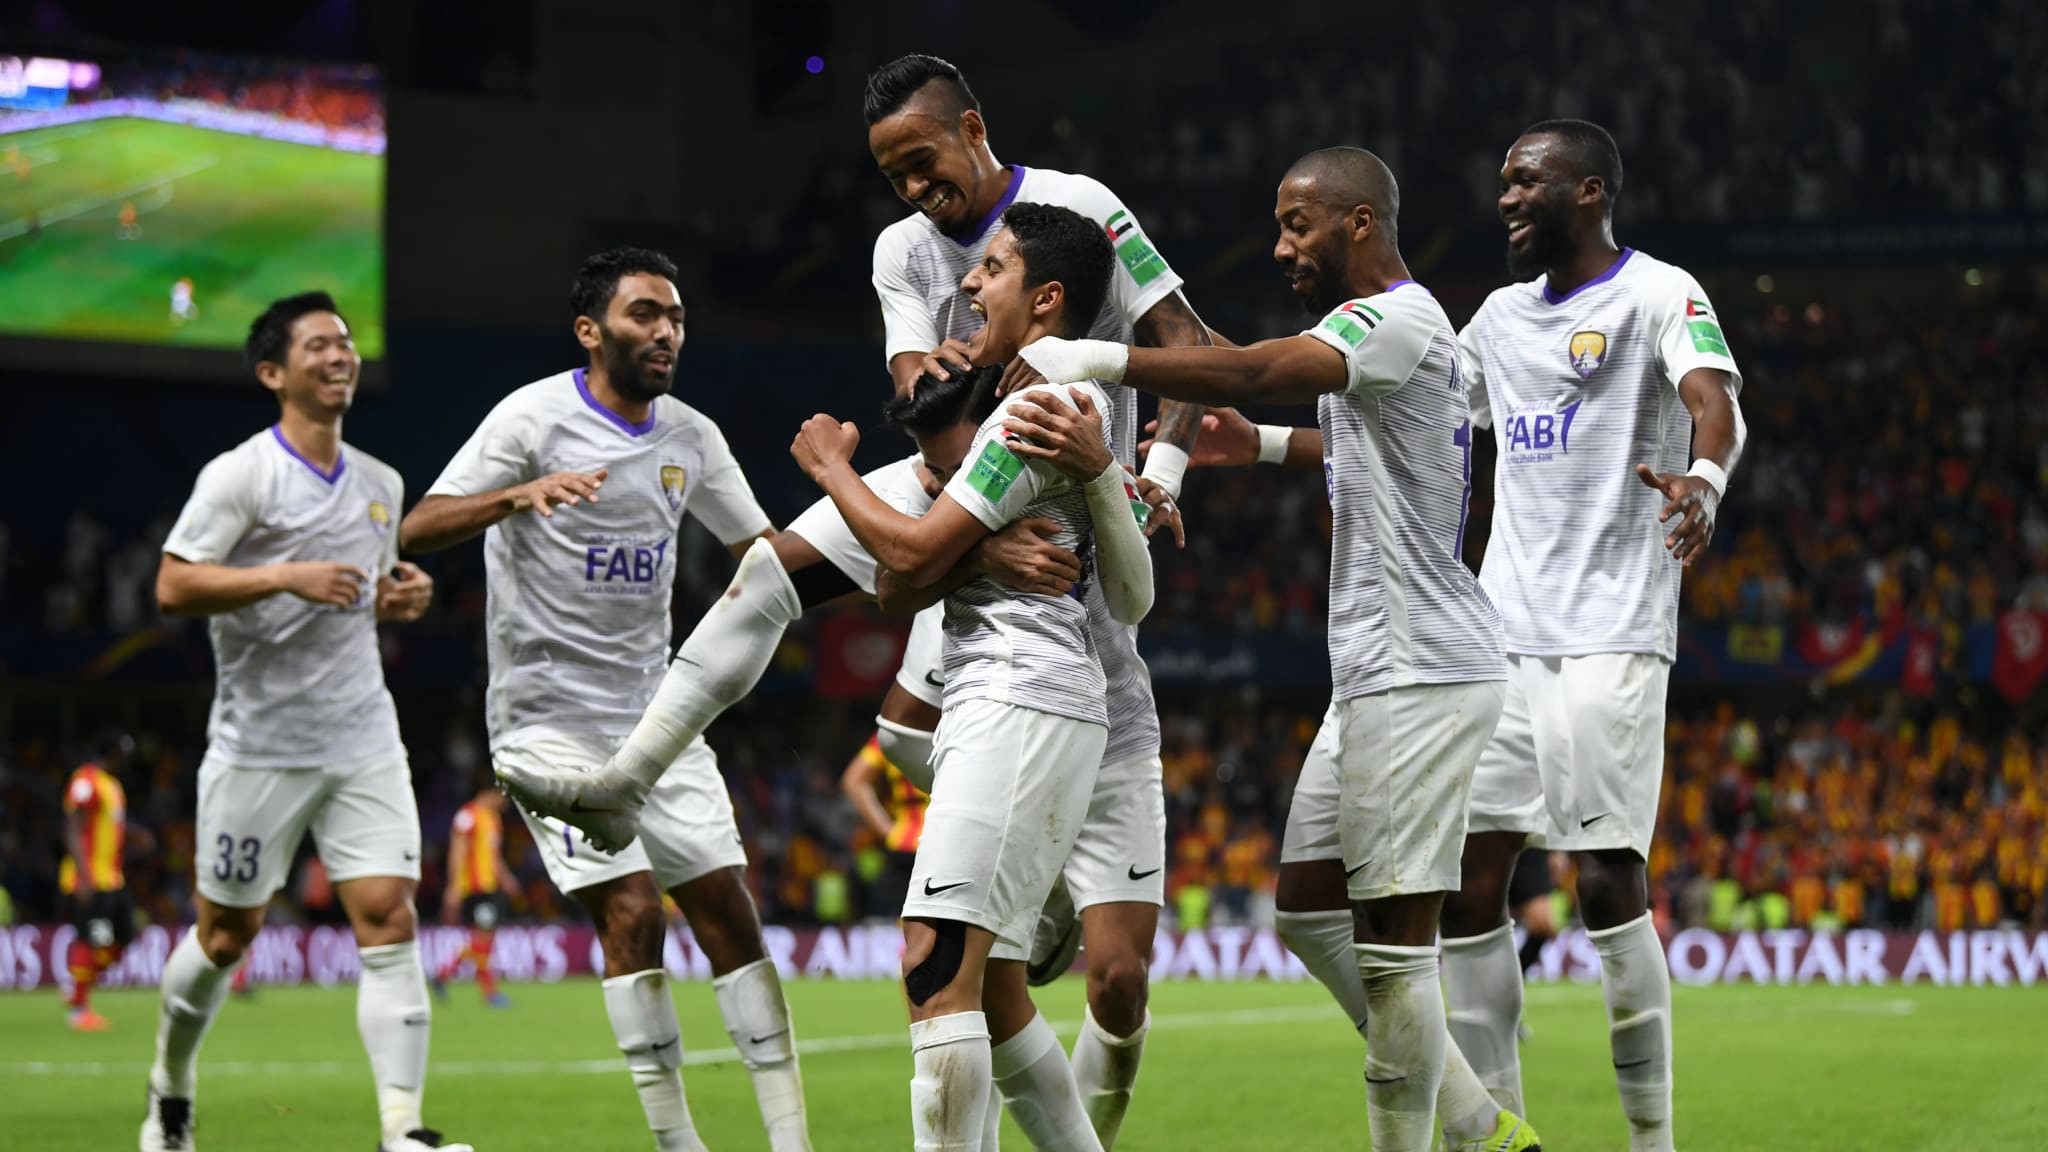 Local heroes Al Ain and Kashima Antlers earn FIFA Club World Cup semi-finals against River Plate and Real Madrid